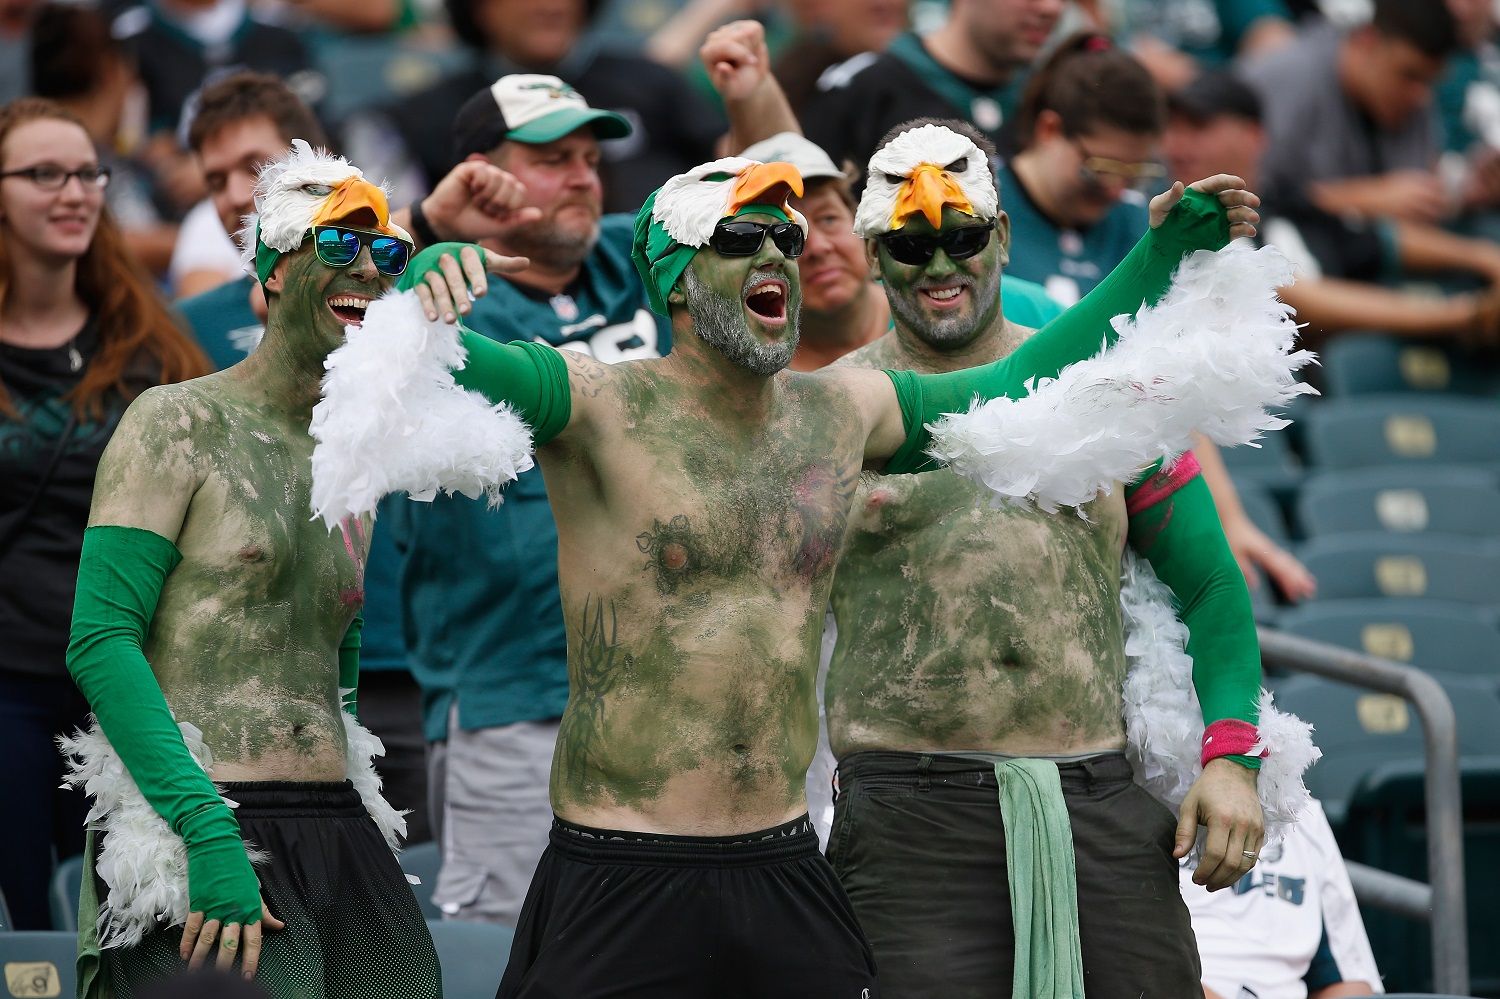 PHILADELPHIA, PA - OCTOBER 08: A fan of the Philadelphia Eagles is dressed as an eagle as he cheers against the Arizona Cardinals during the second half at Lincoln Financial Field on October 8, 2017 in Philadelphia, Pennsylvania.  (Photo by Rich Schultz/Getty Images)